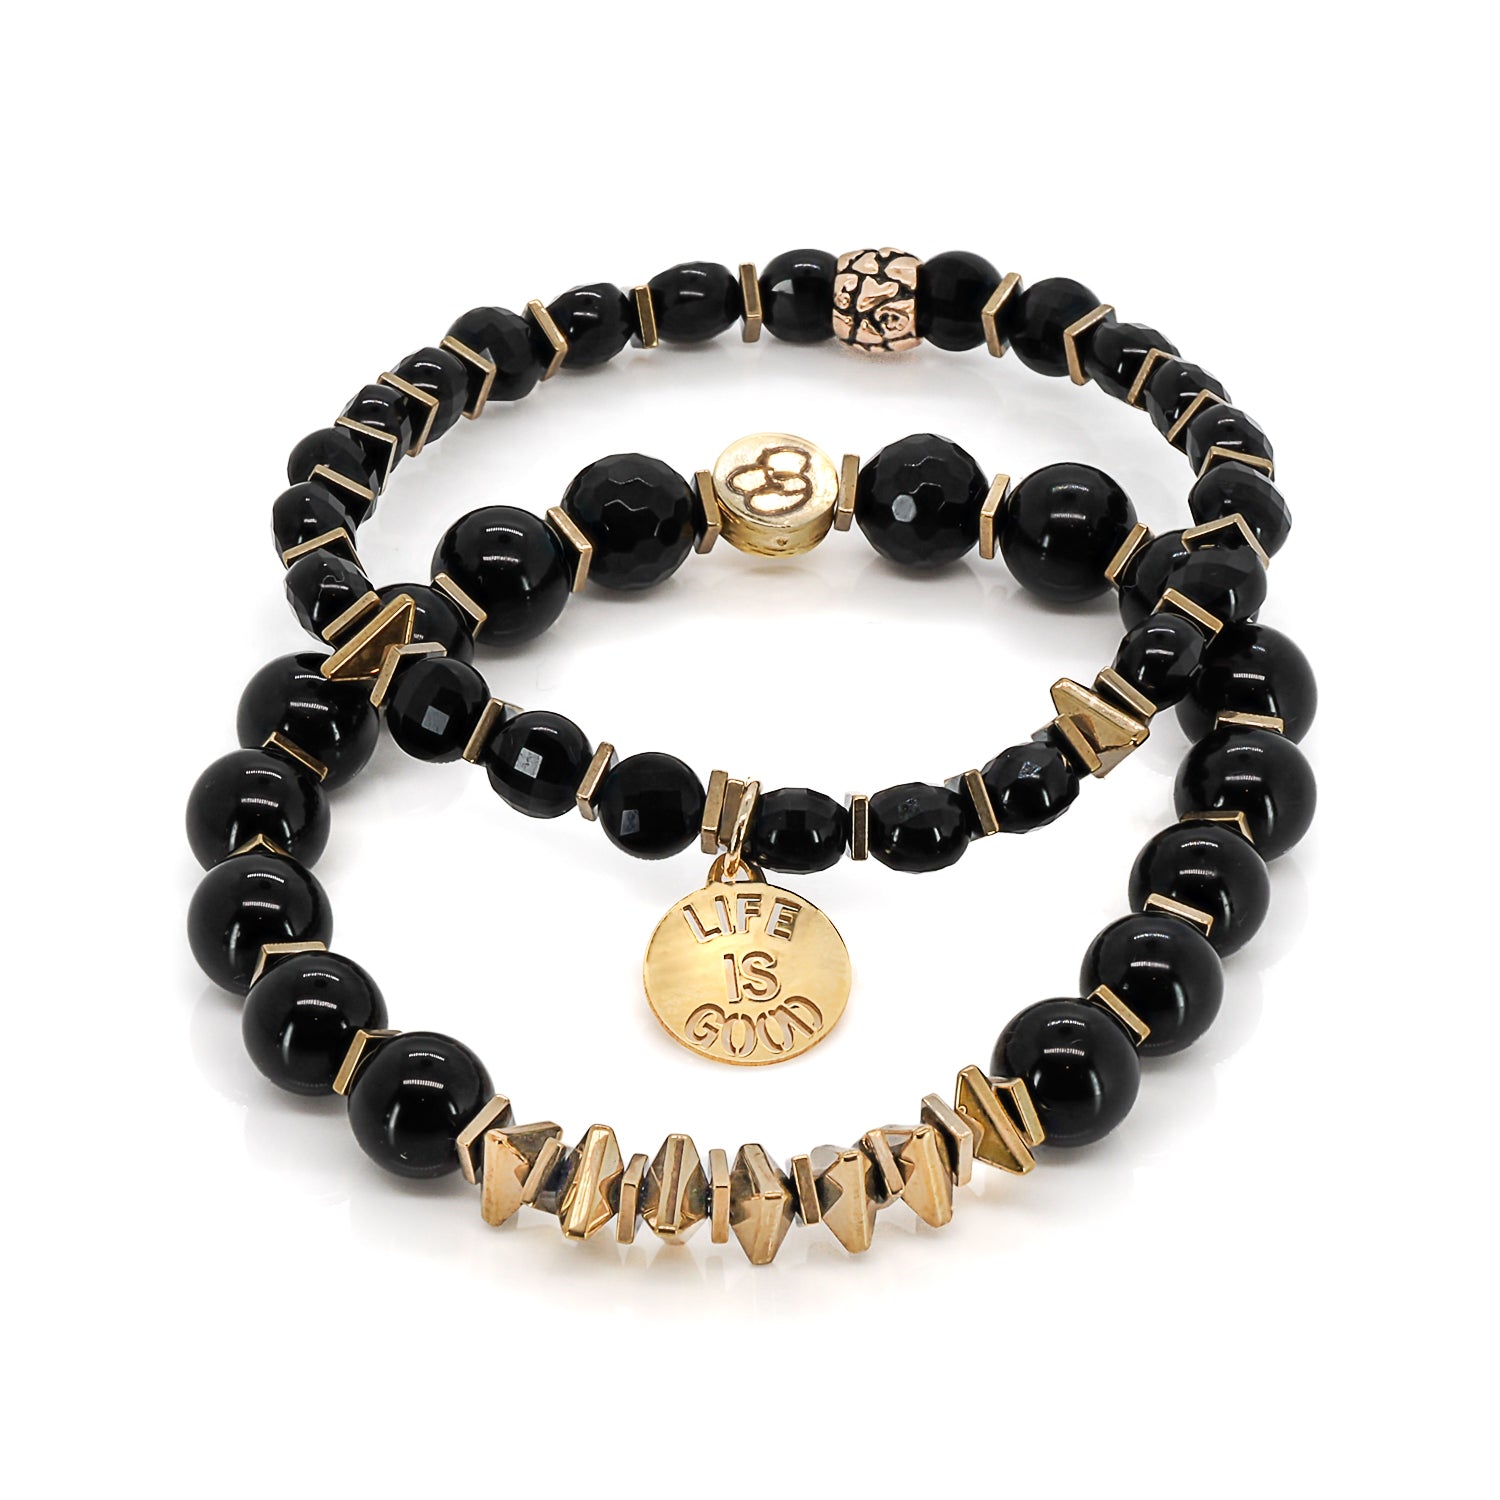 Positivity in Style: Life Is Good Black Onyx Bracelet Set with Sterling Silver Charm